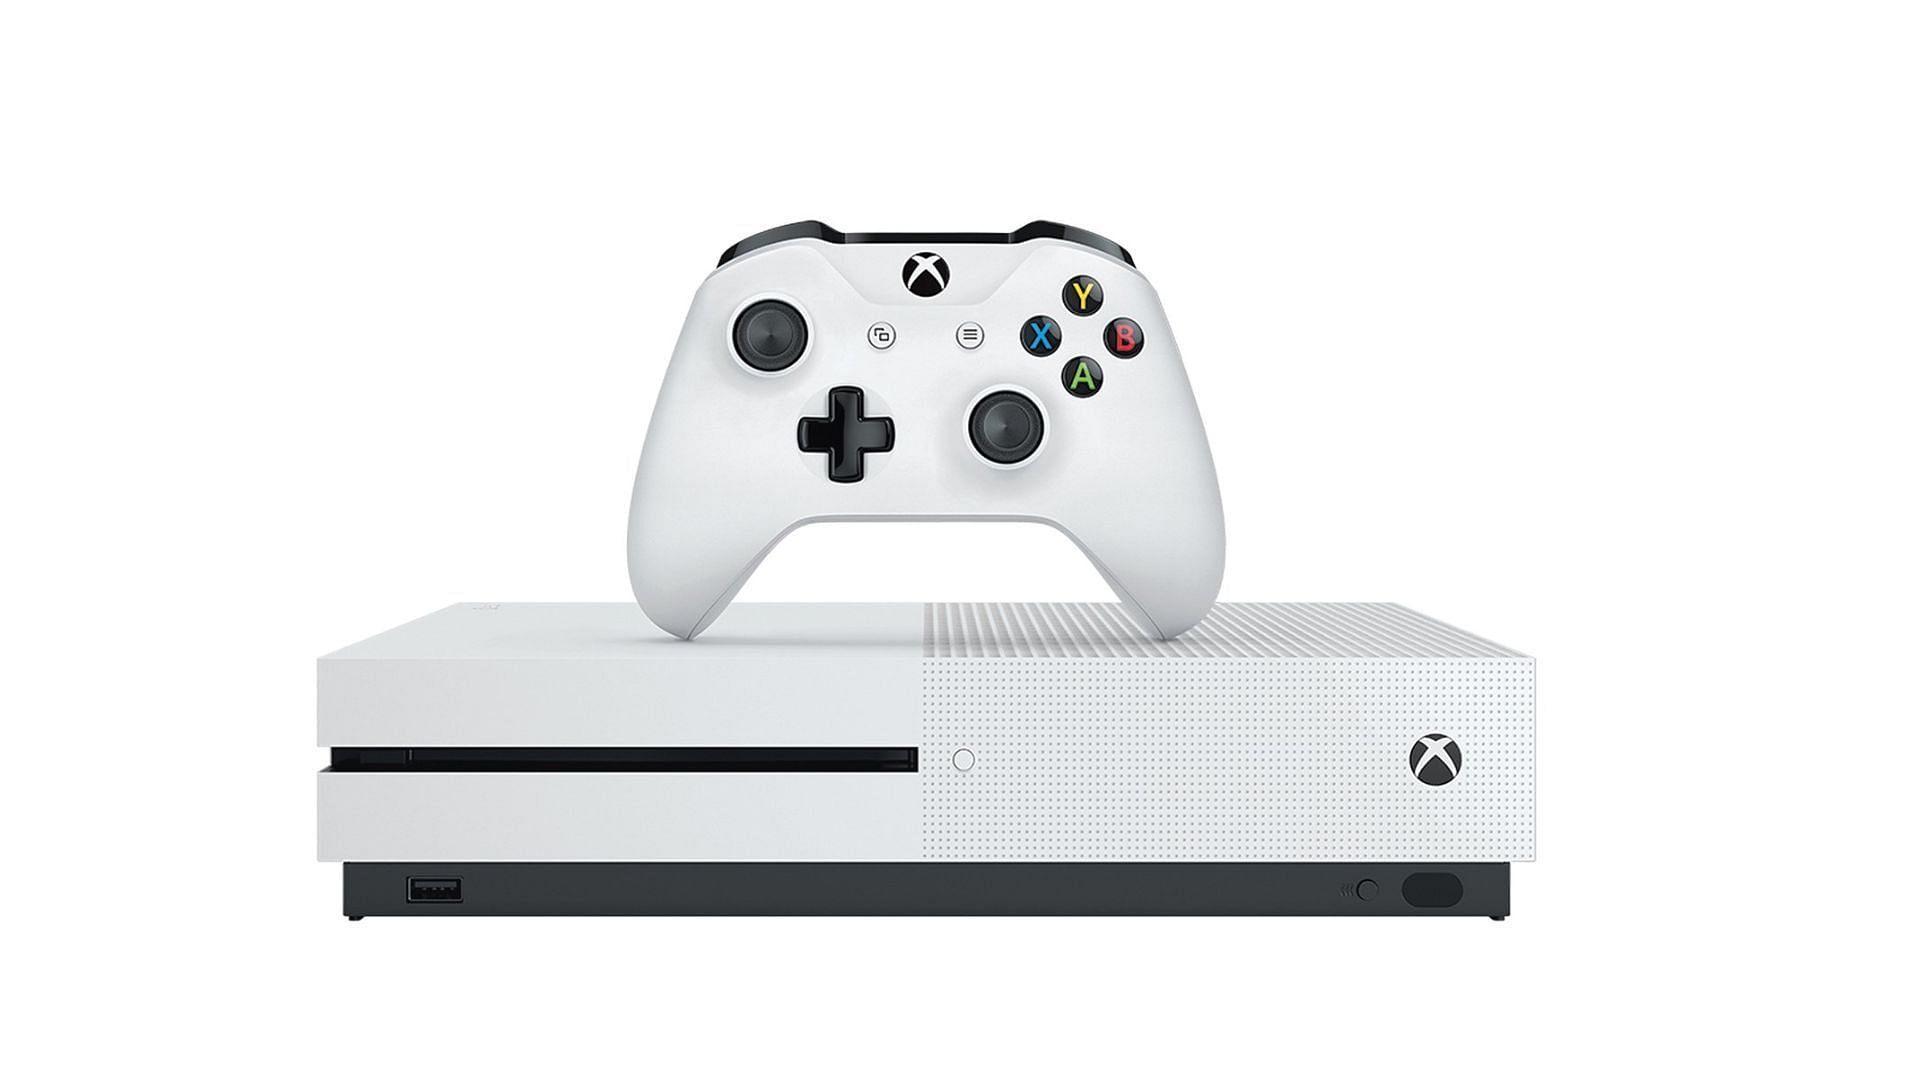 It boosted major improvement over its predecessor. (Image via Ubuy/Xbox)